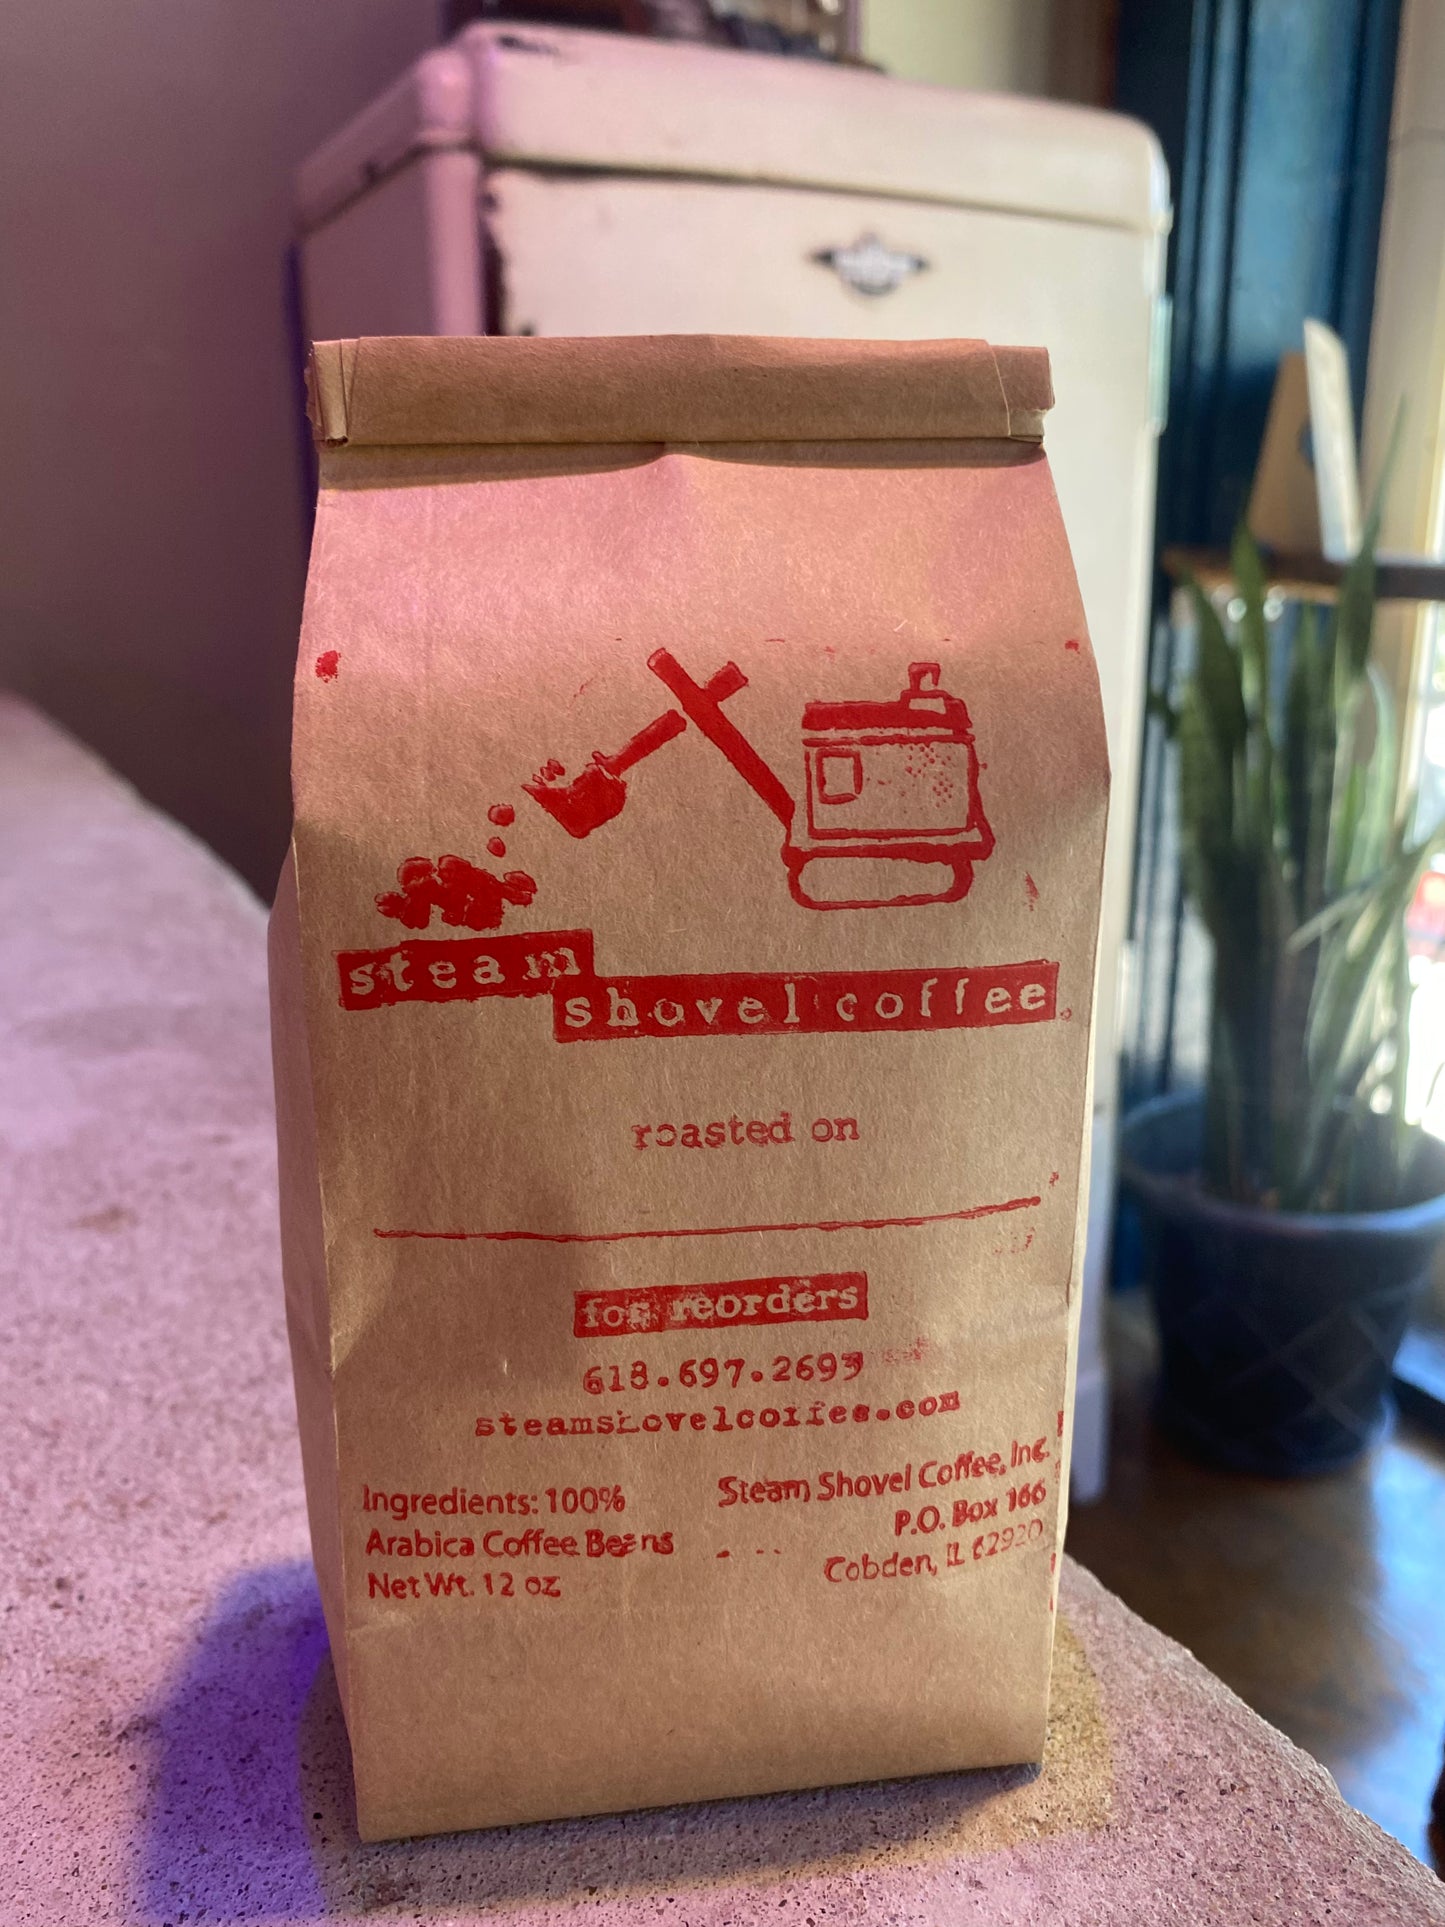 1 twelve ounce bag of Steam Shovel Coffee (FREE SHIPPING)